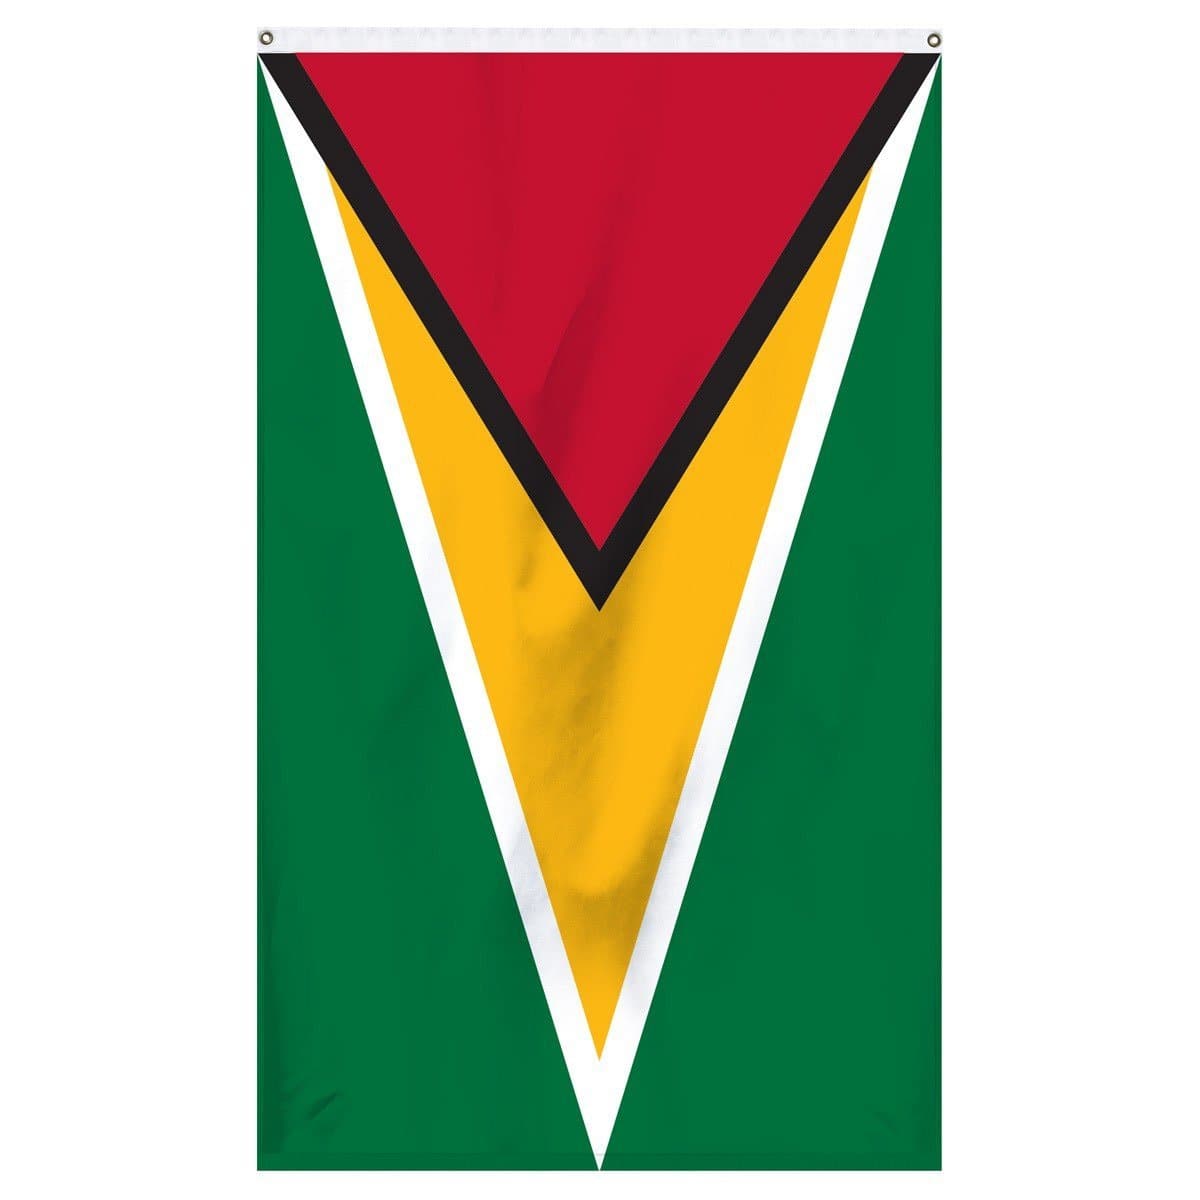 Guyana national flag for sale to buy online for flagpoles and parades